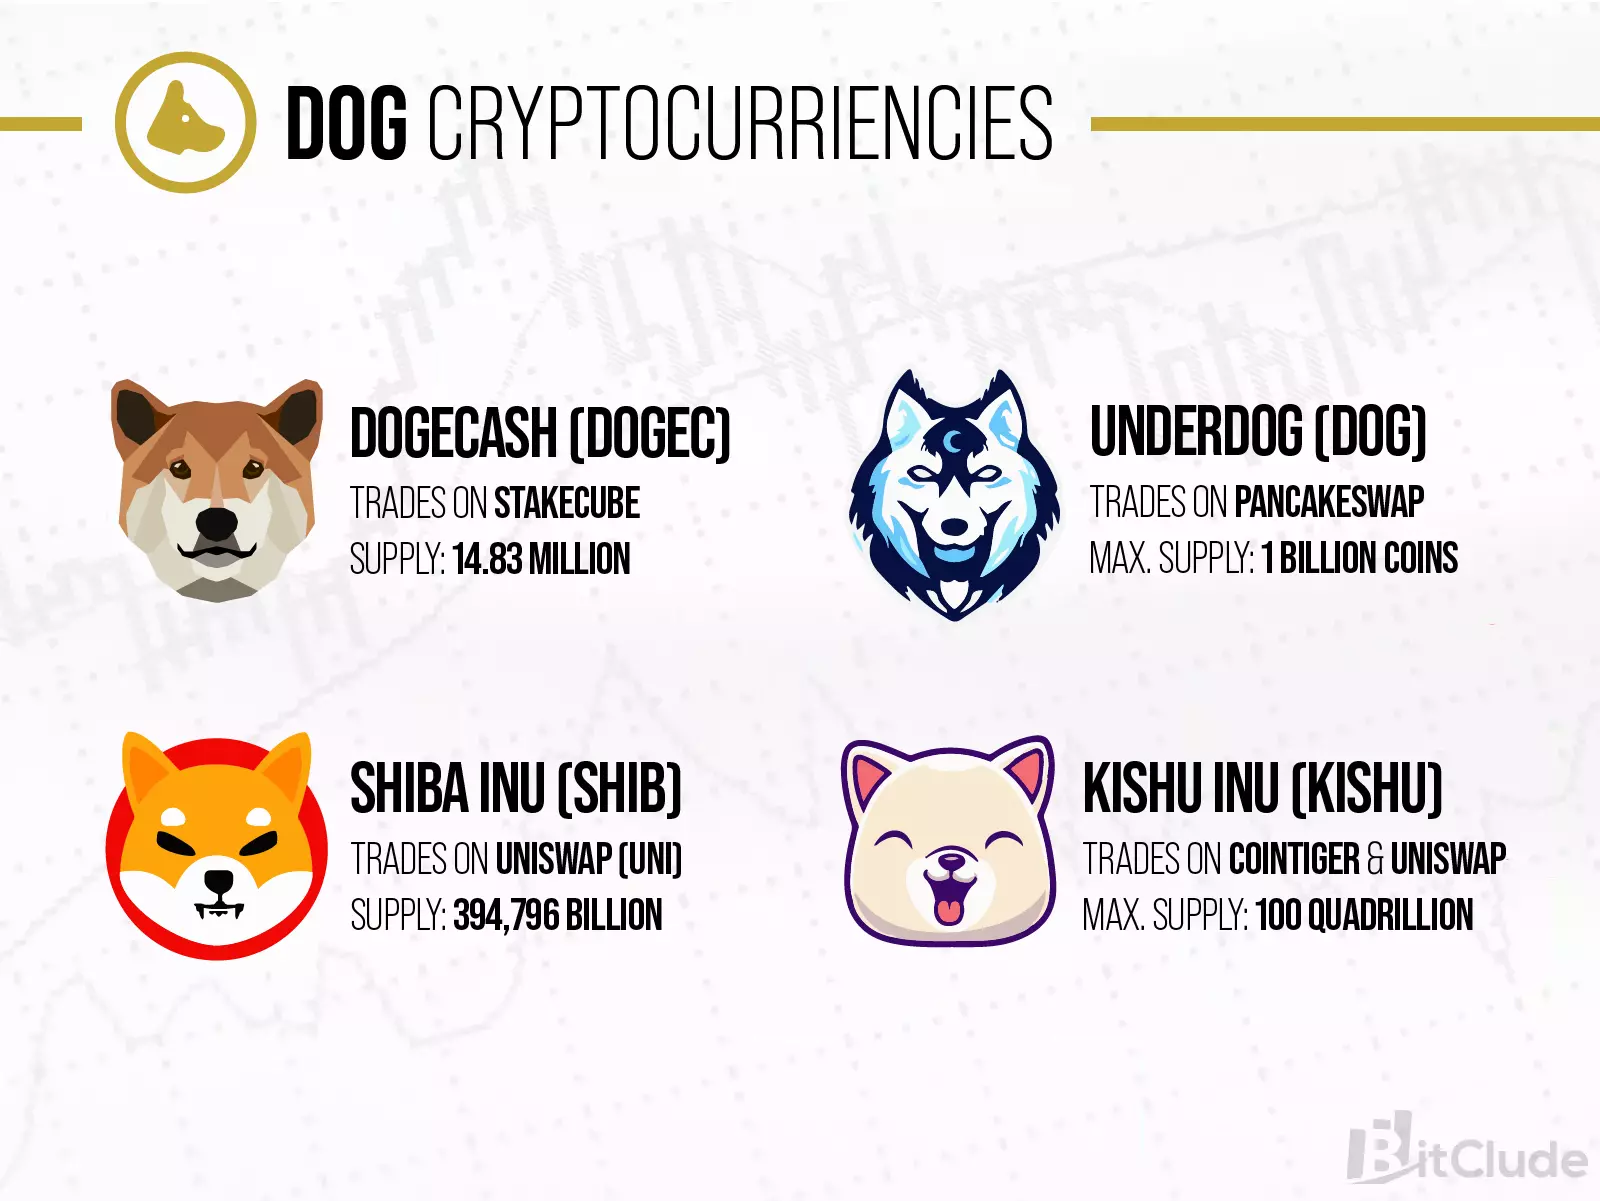 Another dog-related cryptocurrencies are Dogecash, Underdog, Shiba Inu and Kishu Inu.